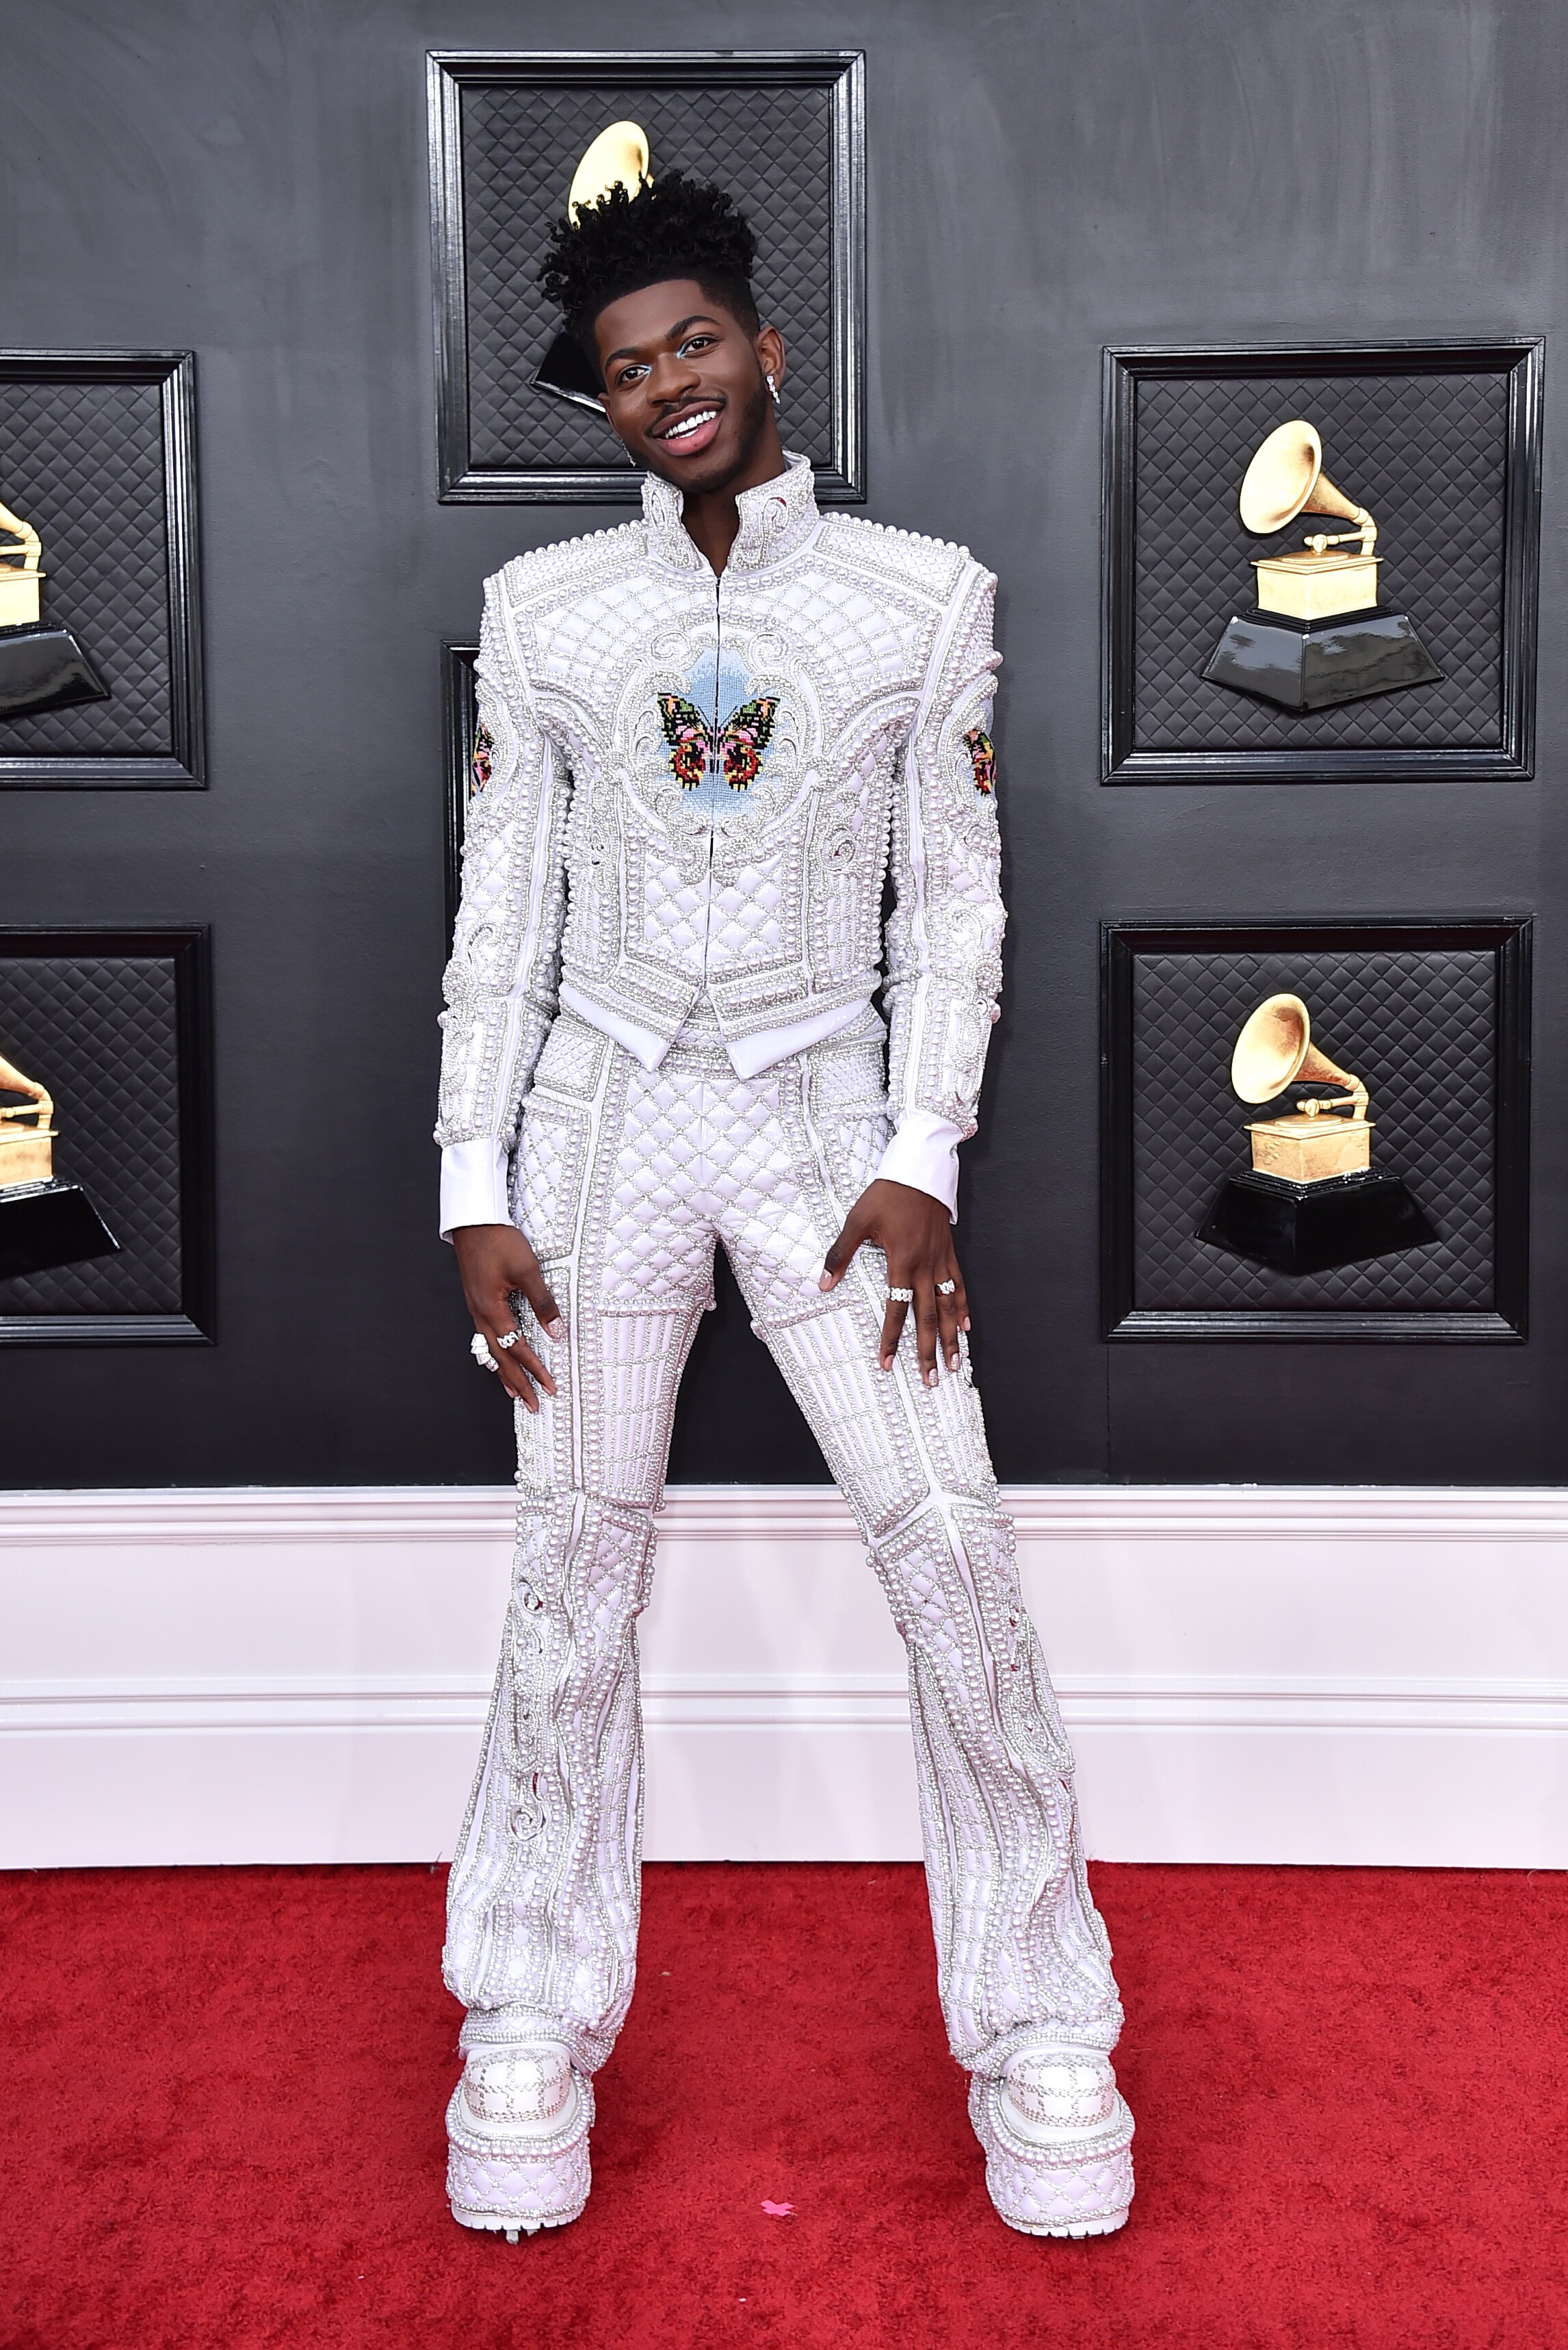 lil nas x wearing a white heavily embellished suit with a butterfly detail and platform matching white boots on the red carpet